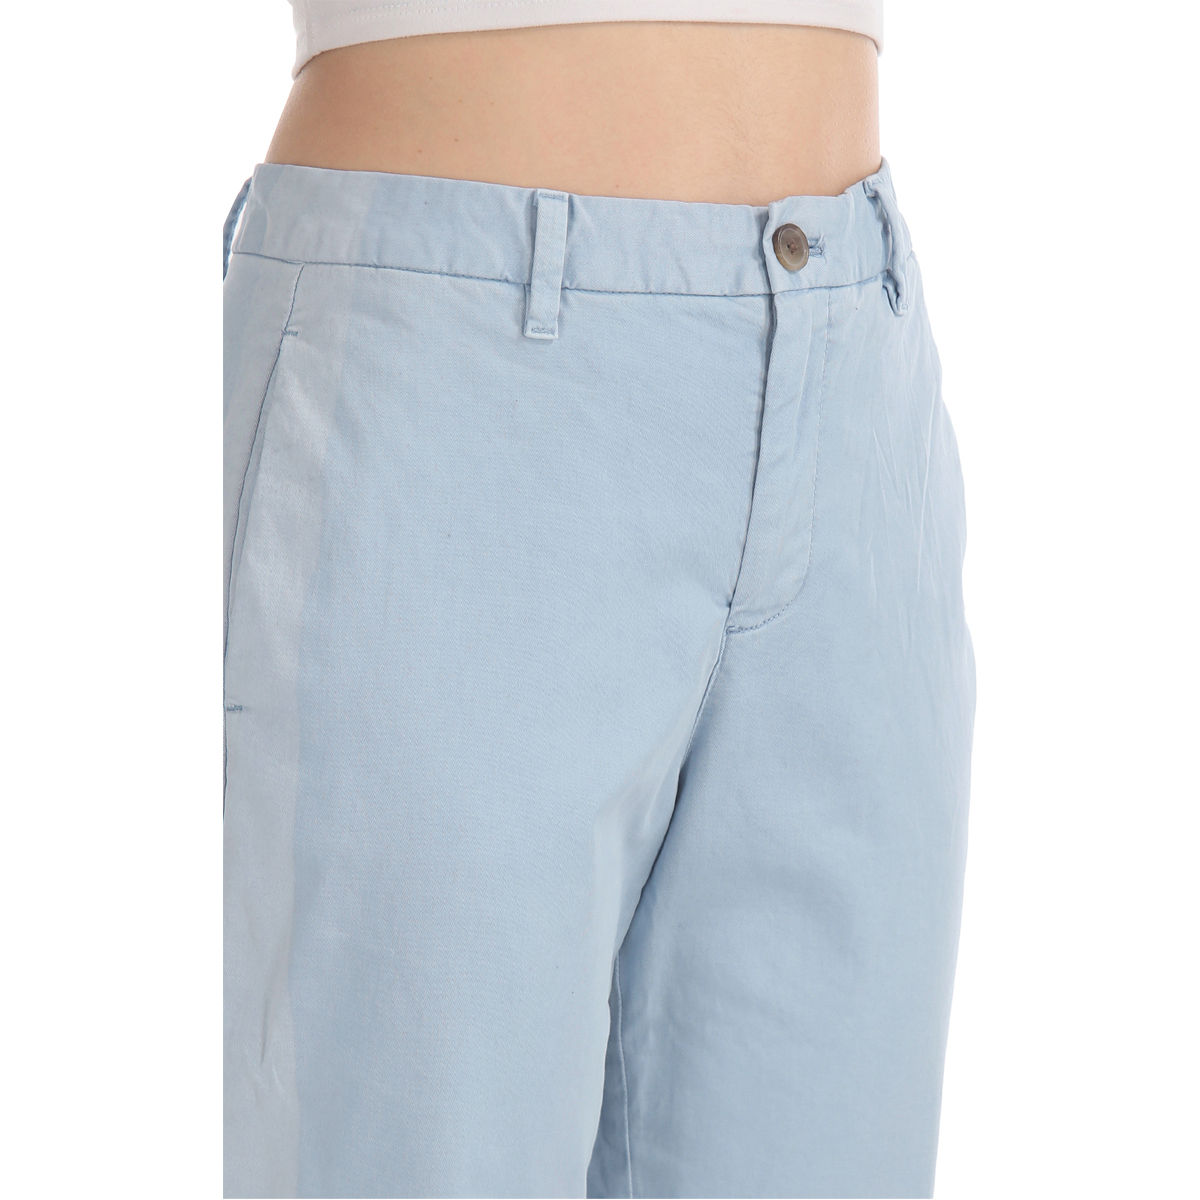 Gap Mid Rise Girlfriend Fit Solid Color Trouser Styled with Raw Hem & Faded Side Seam Line - Blue, Size-10